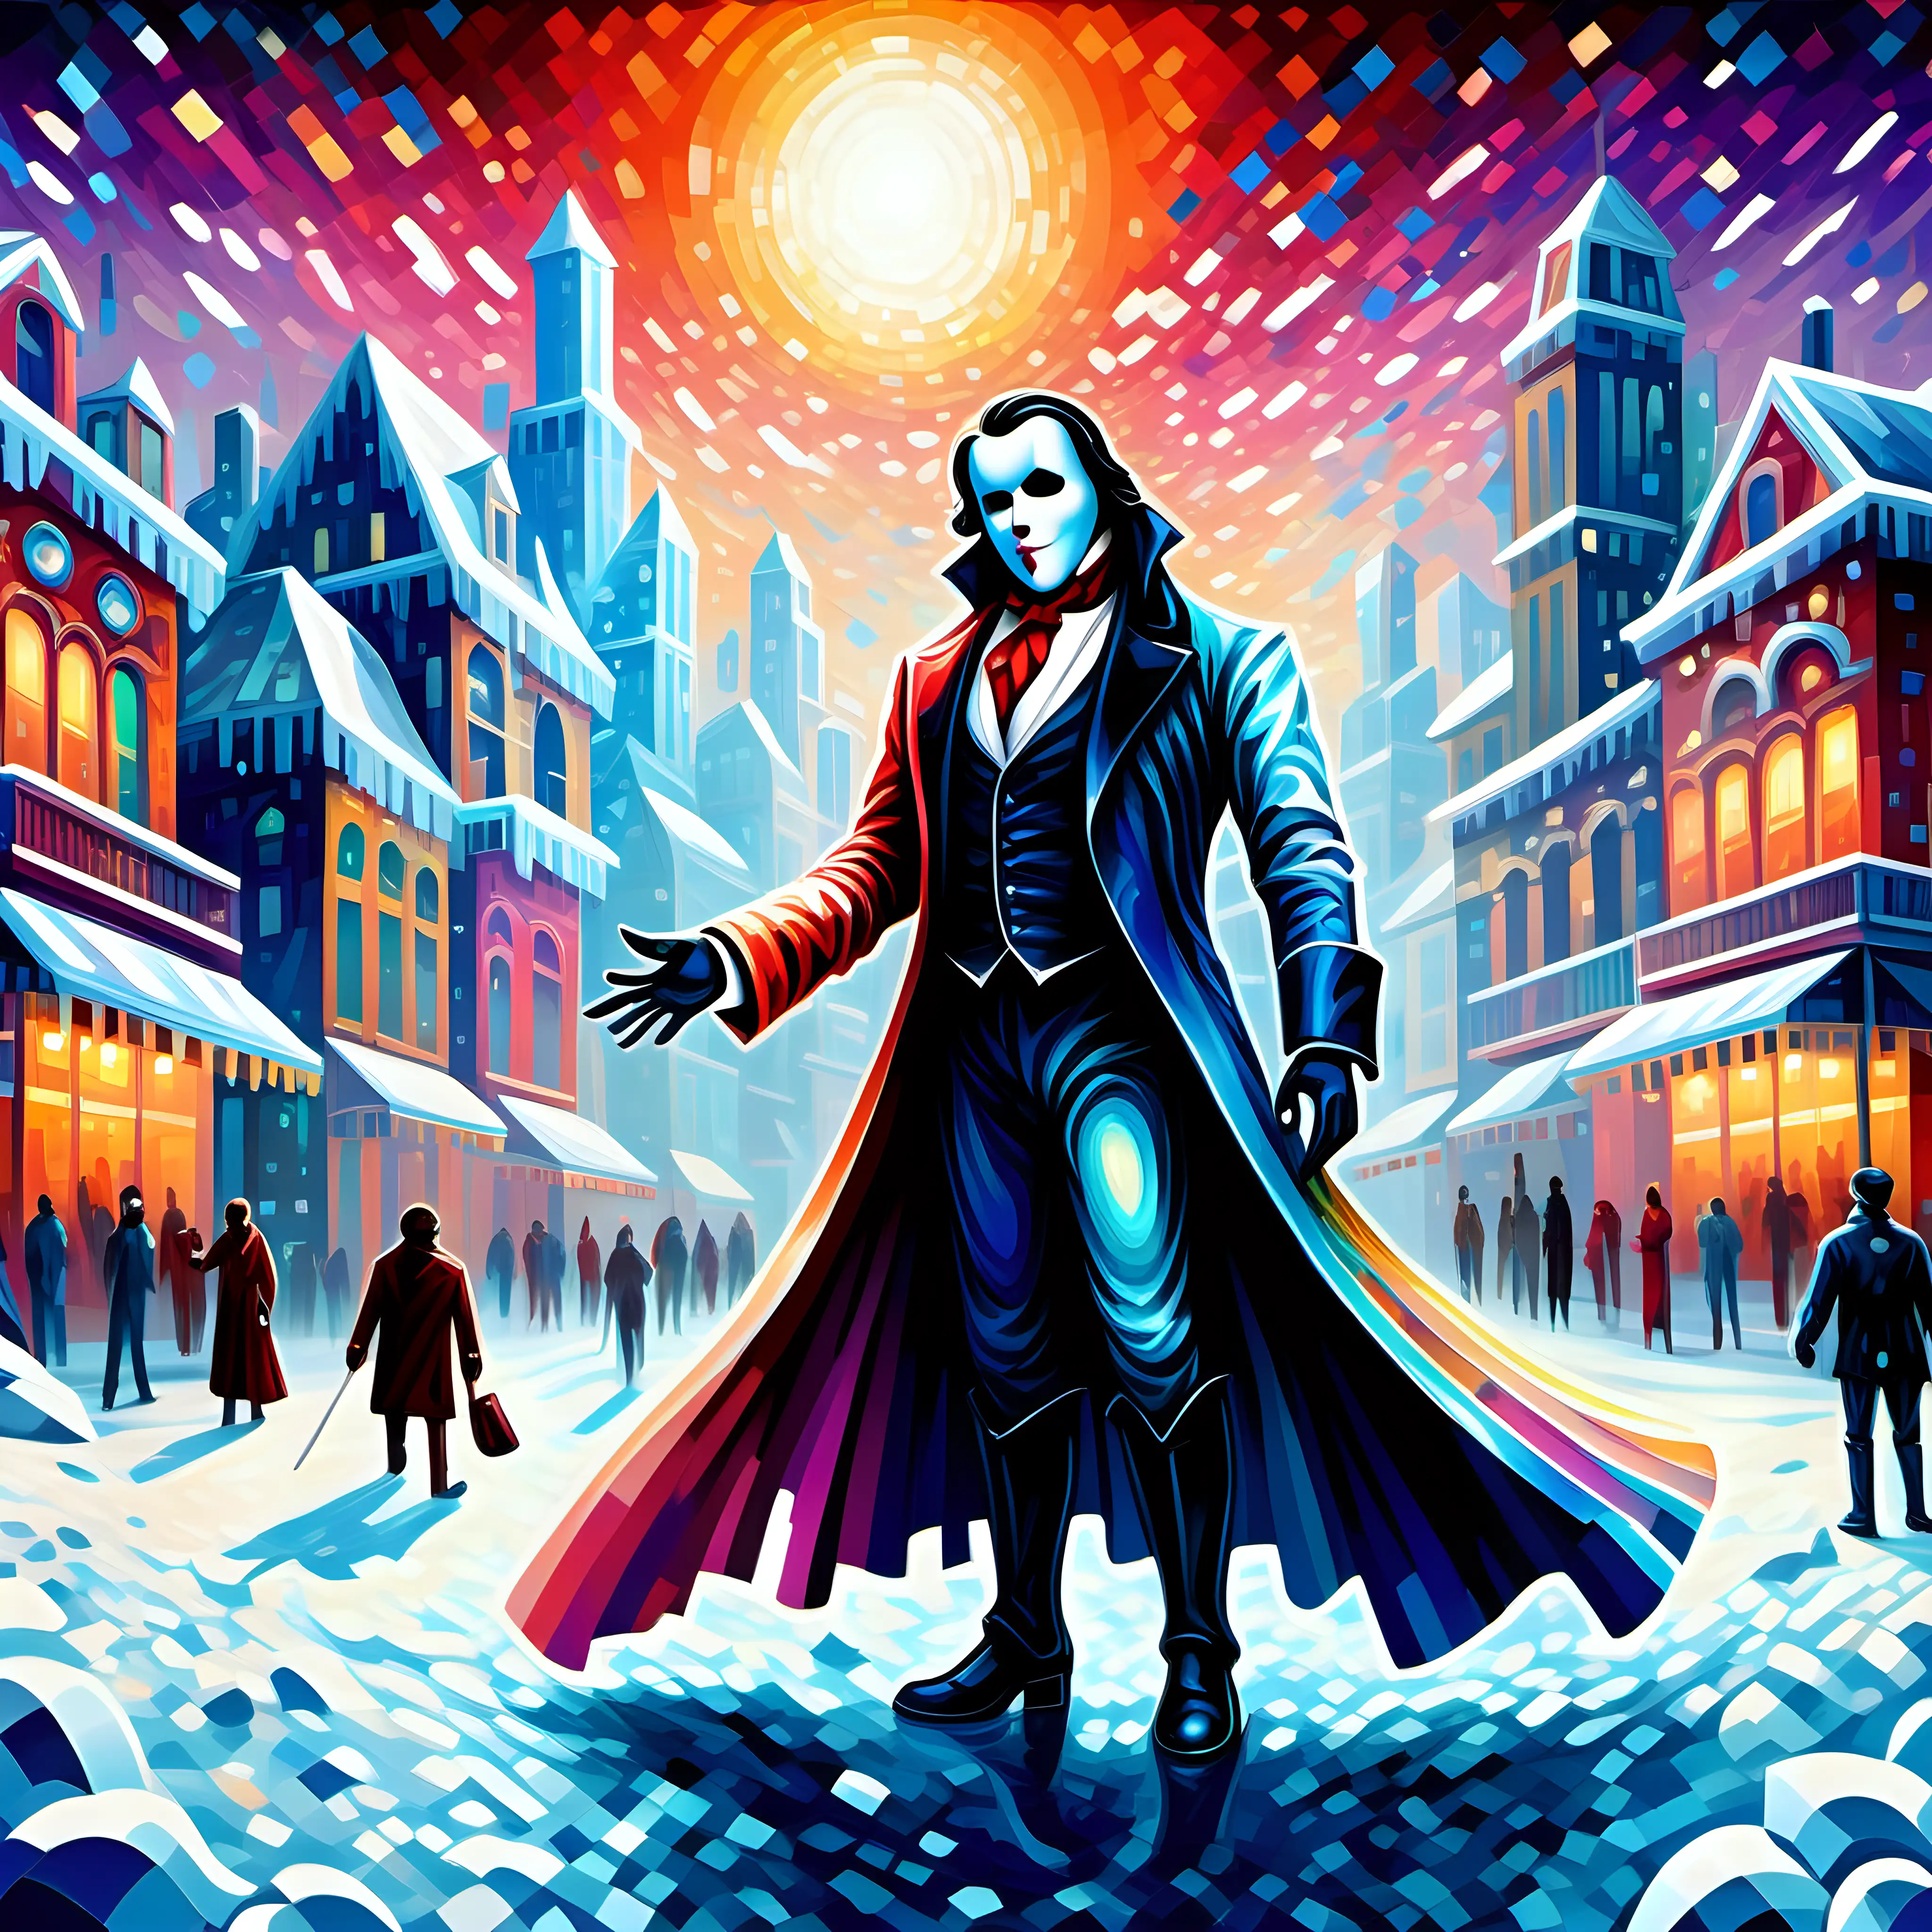 "Craft an AI artwork that seamlessly blends [detailed oil painting style phantom of the opera in a pixelated colorful ice world]into a harmonious and thought-provoking visual narrative, pushing the boundaries of creative synthesis."HD, High Quality, beautiful bold background of contrast and warm colors.